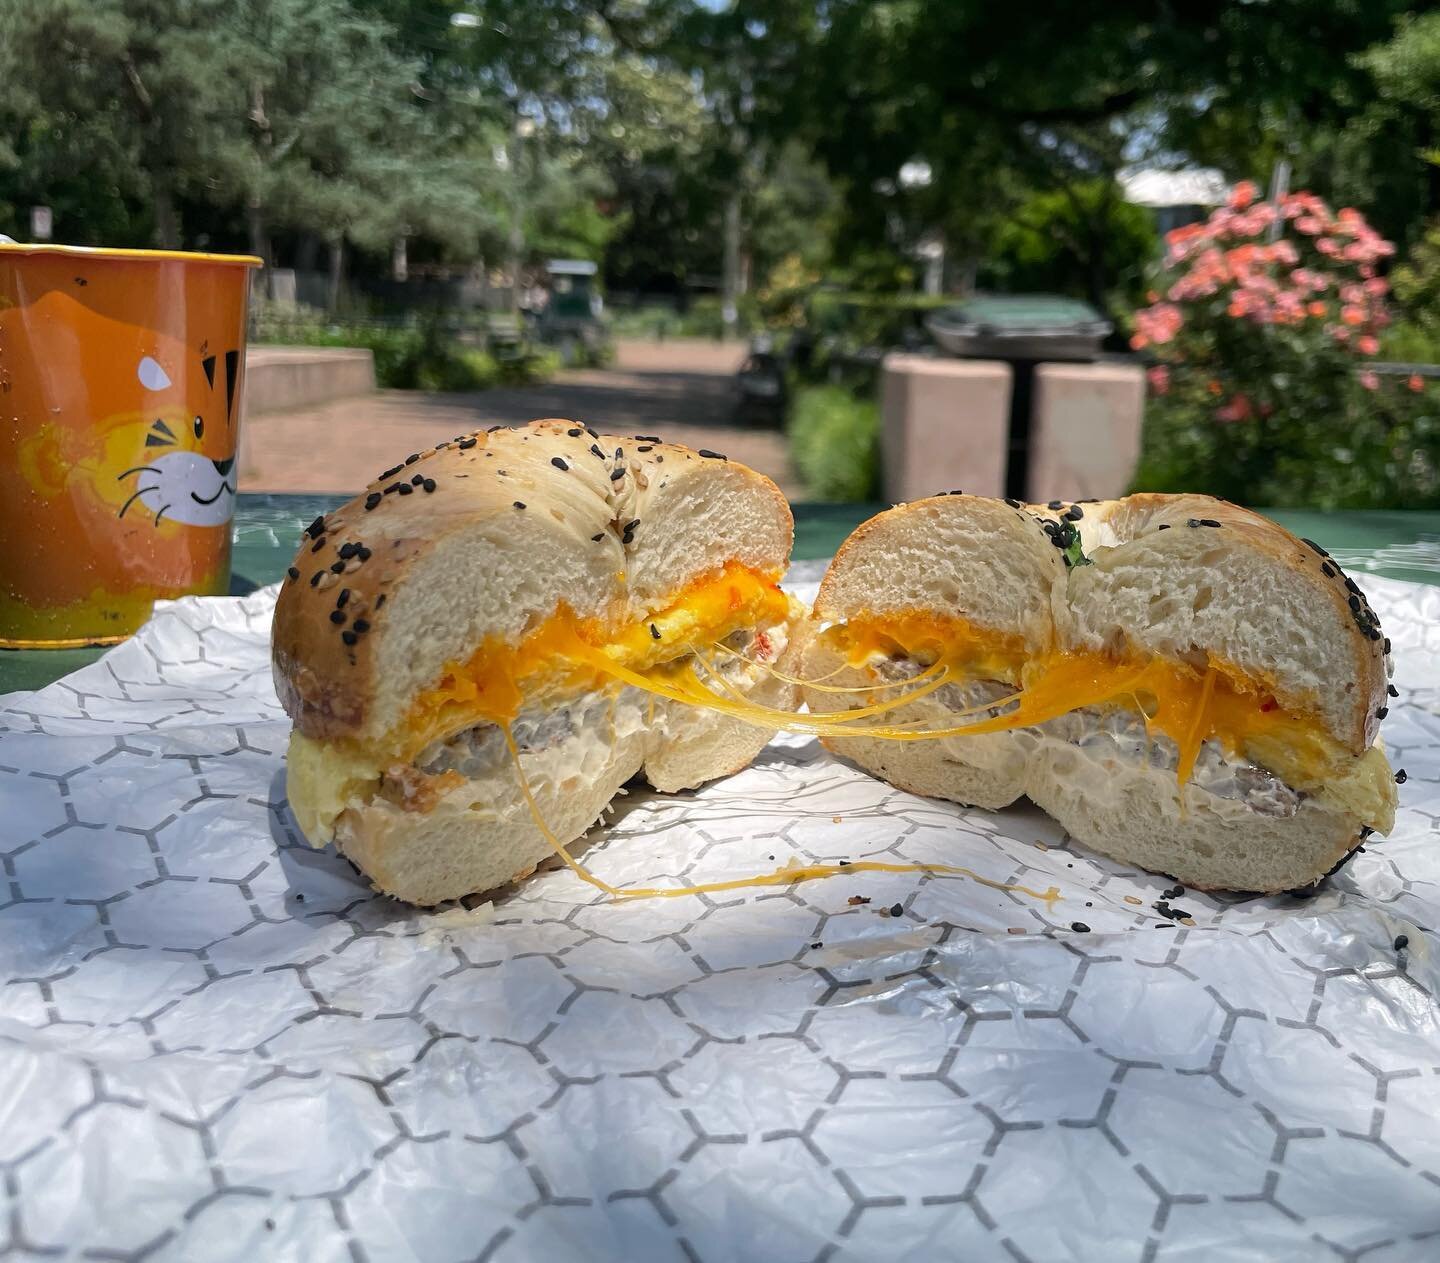 Go crazy this week and get you a Bagel Breakfast Sammy from @natesbagels with cream cheese spiked with our Wildfire Hot Sauce, you won&rsquo;t regret it!!

Richmond&rsquo;s favorite bagel shop features our Sauerkraut on their Bagel Reubens and our Sa